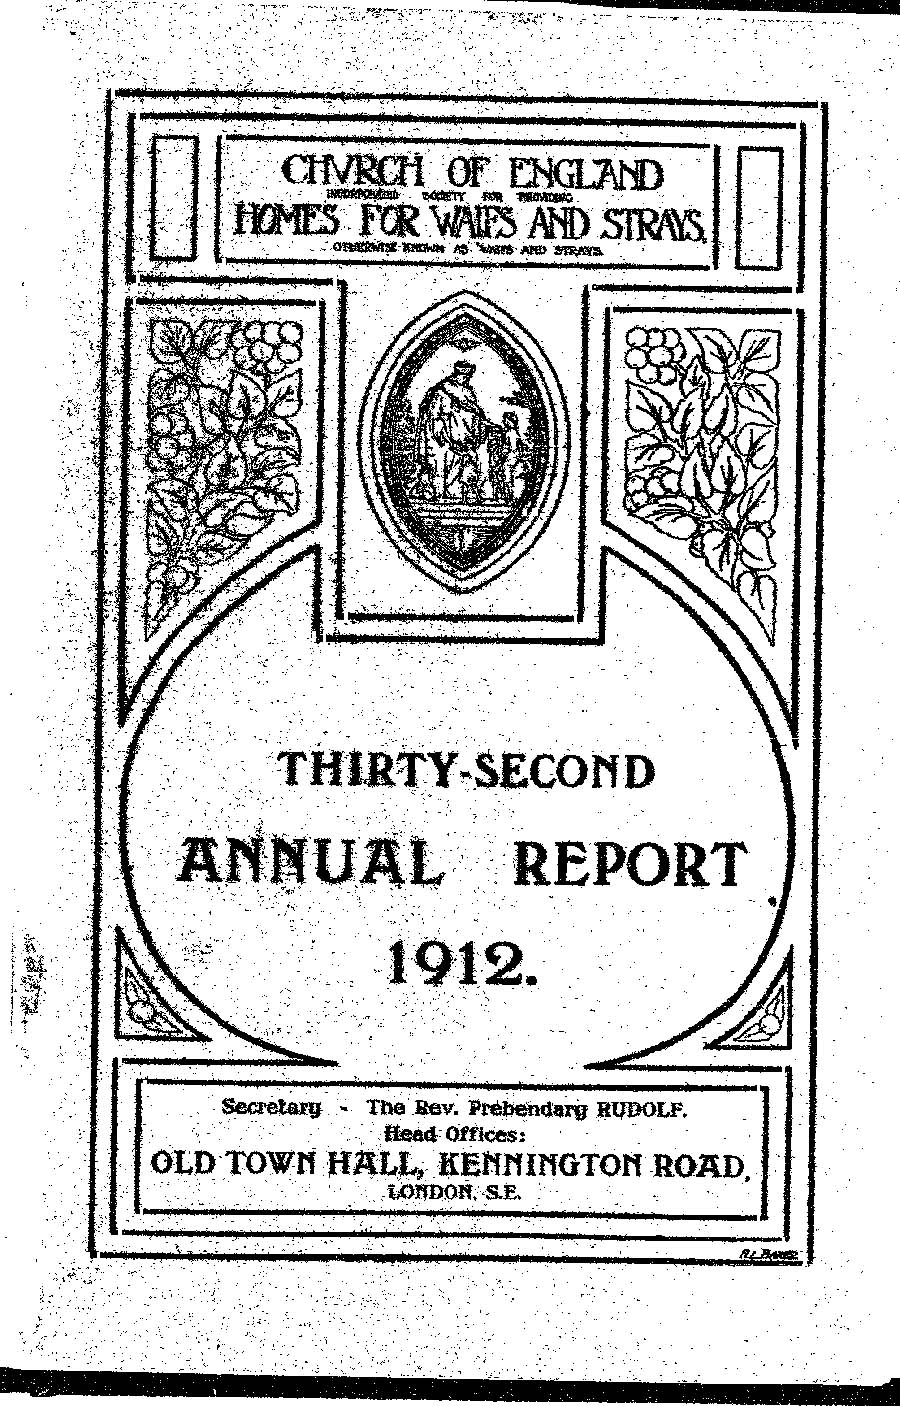 Annual Report 1912 - page 1